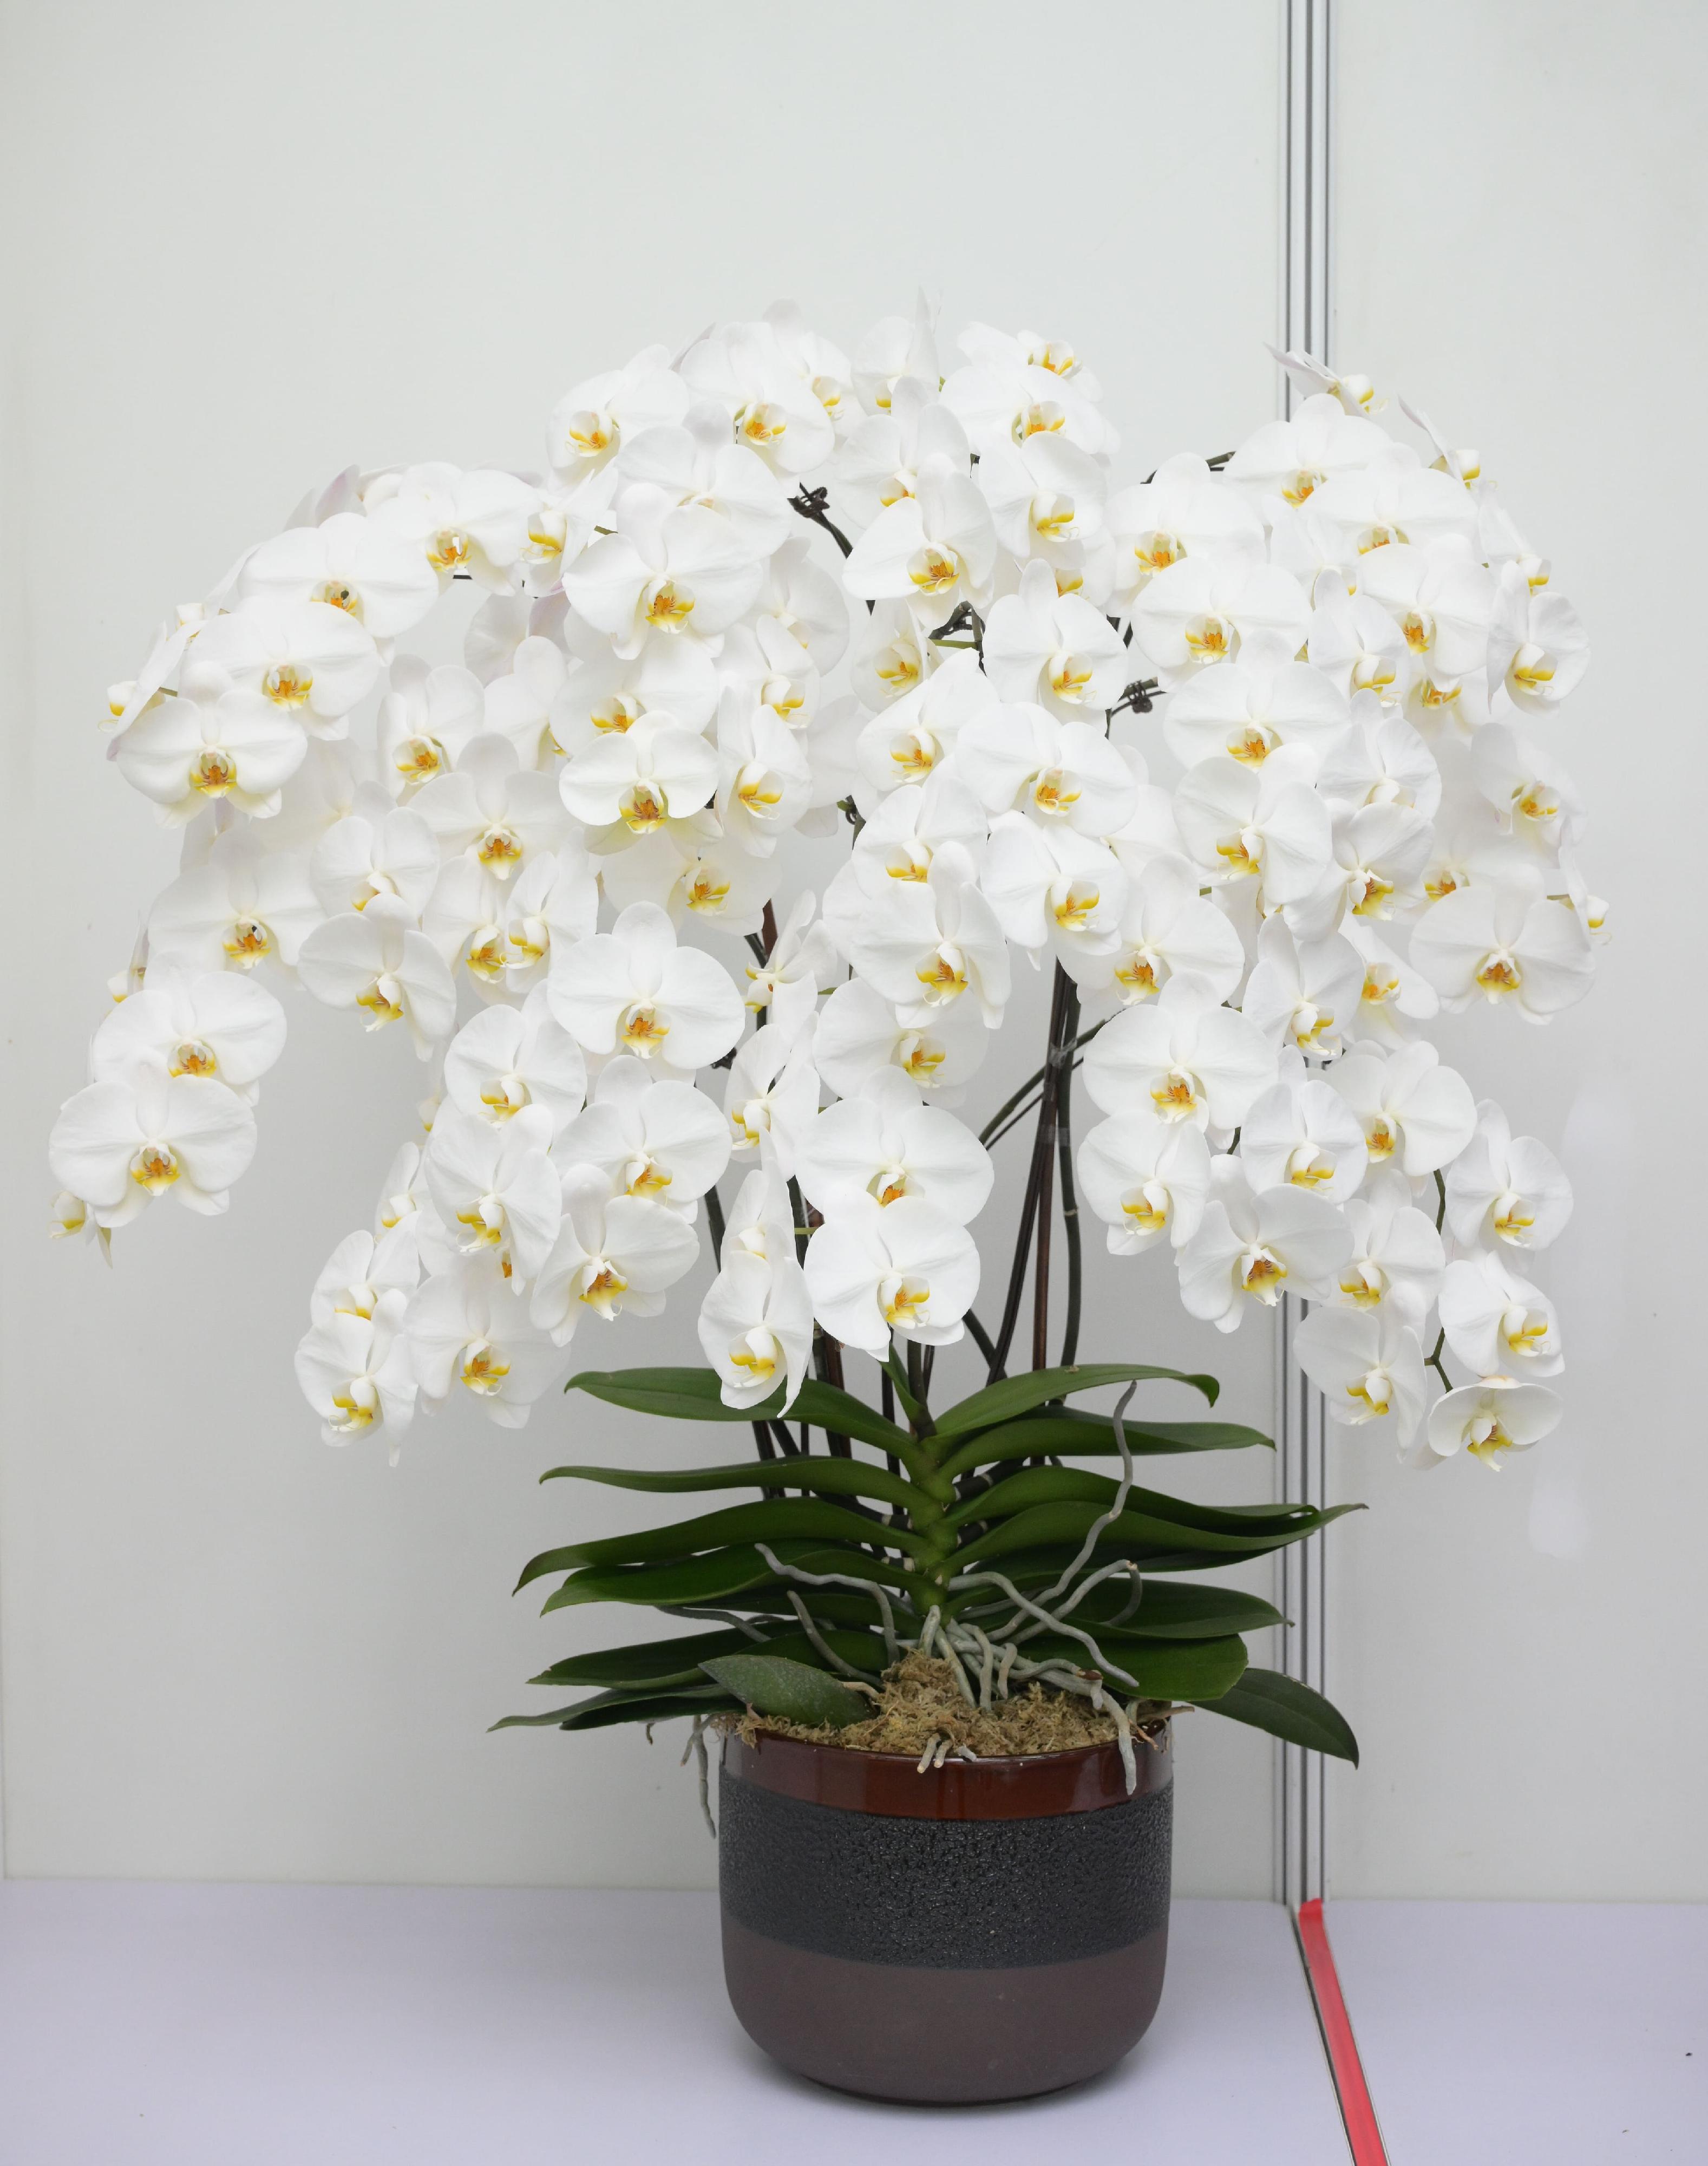 The winners of the plant exhibit competition, one of the major activities of the Hong Kong Flower Show, were announced today (March 16). Photo shows the best exhibit in the Open Competition Section, a pot of exquisite orchids.